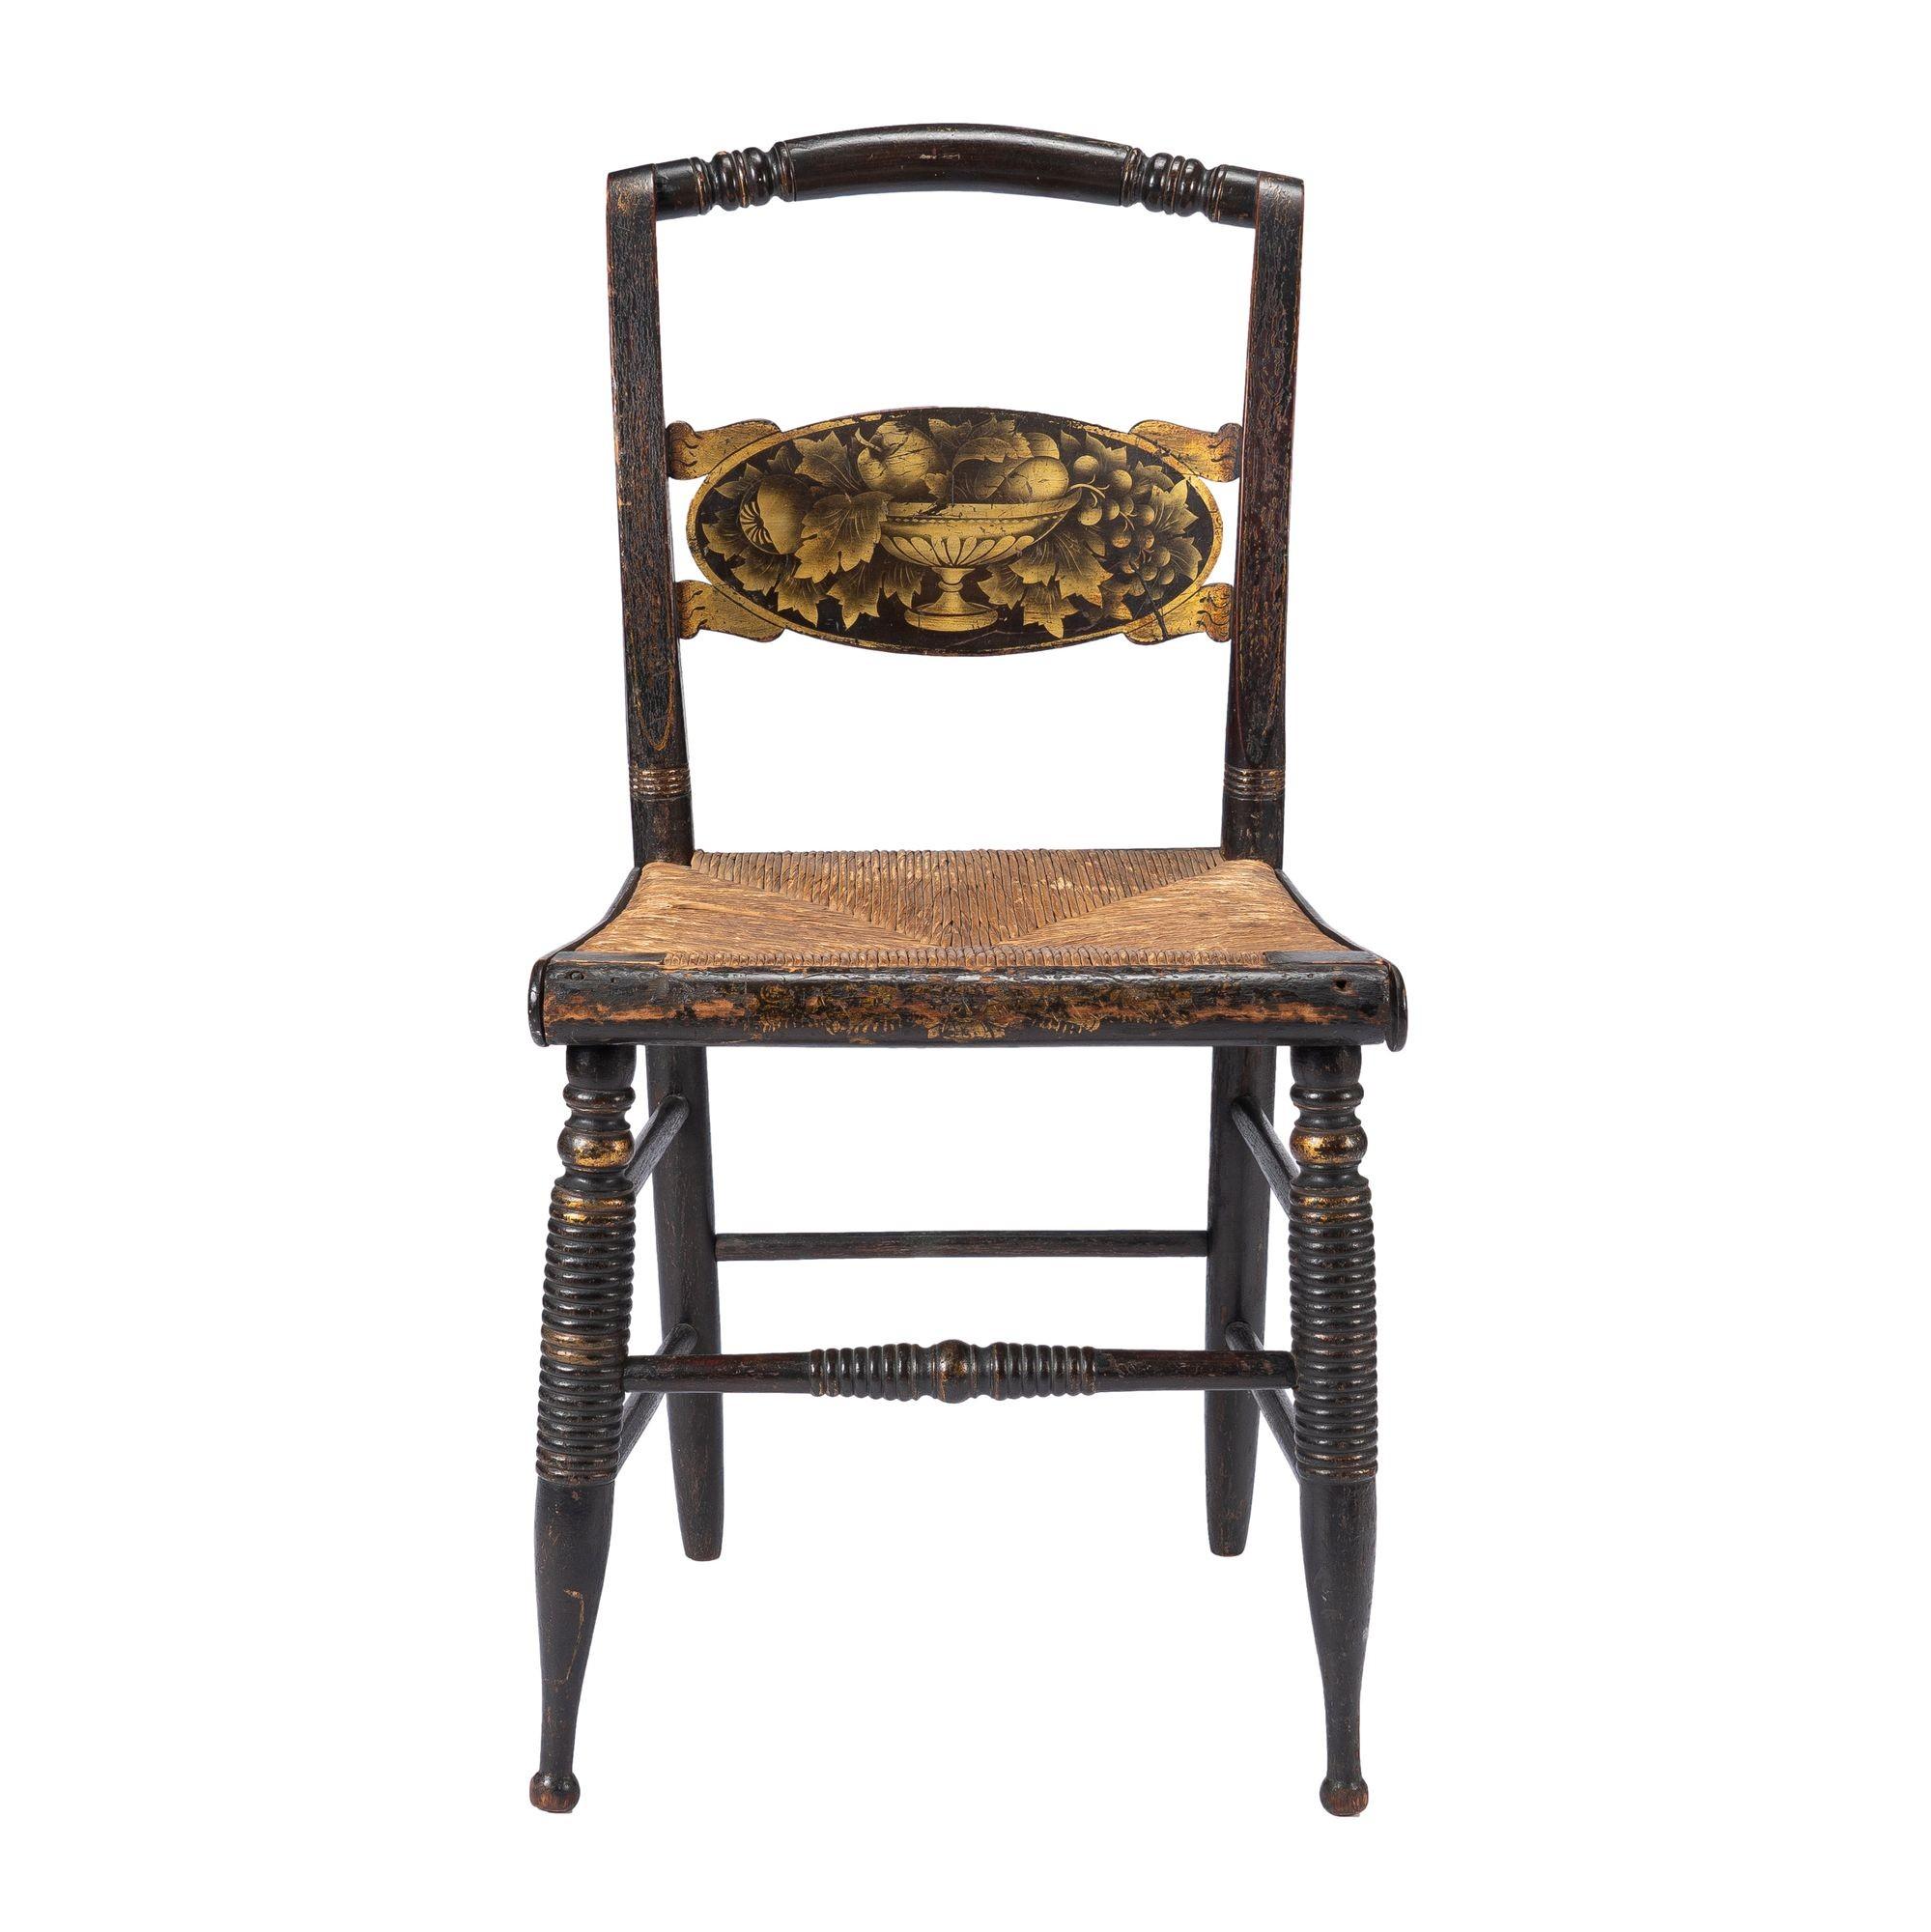 American turtle back, Hitchcock type, rush seat side chair. The back splat features the original gilt and bronze powder stencil decoration of an ornate pedistal base bowl holding fruit and surrounded by leaves. Gilt decorations on the back supports,